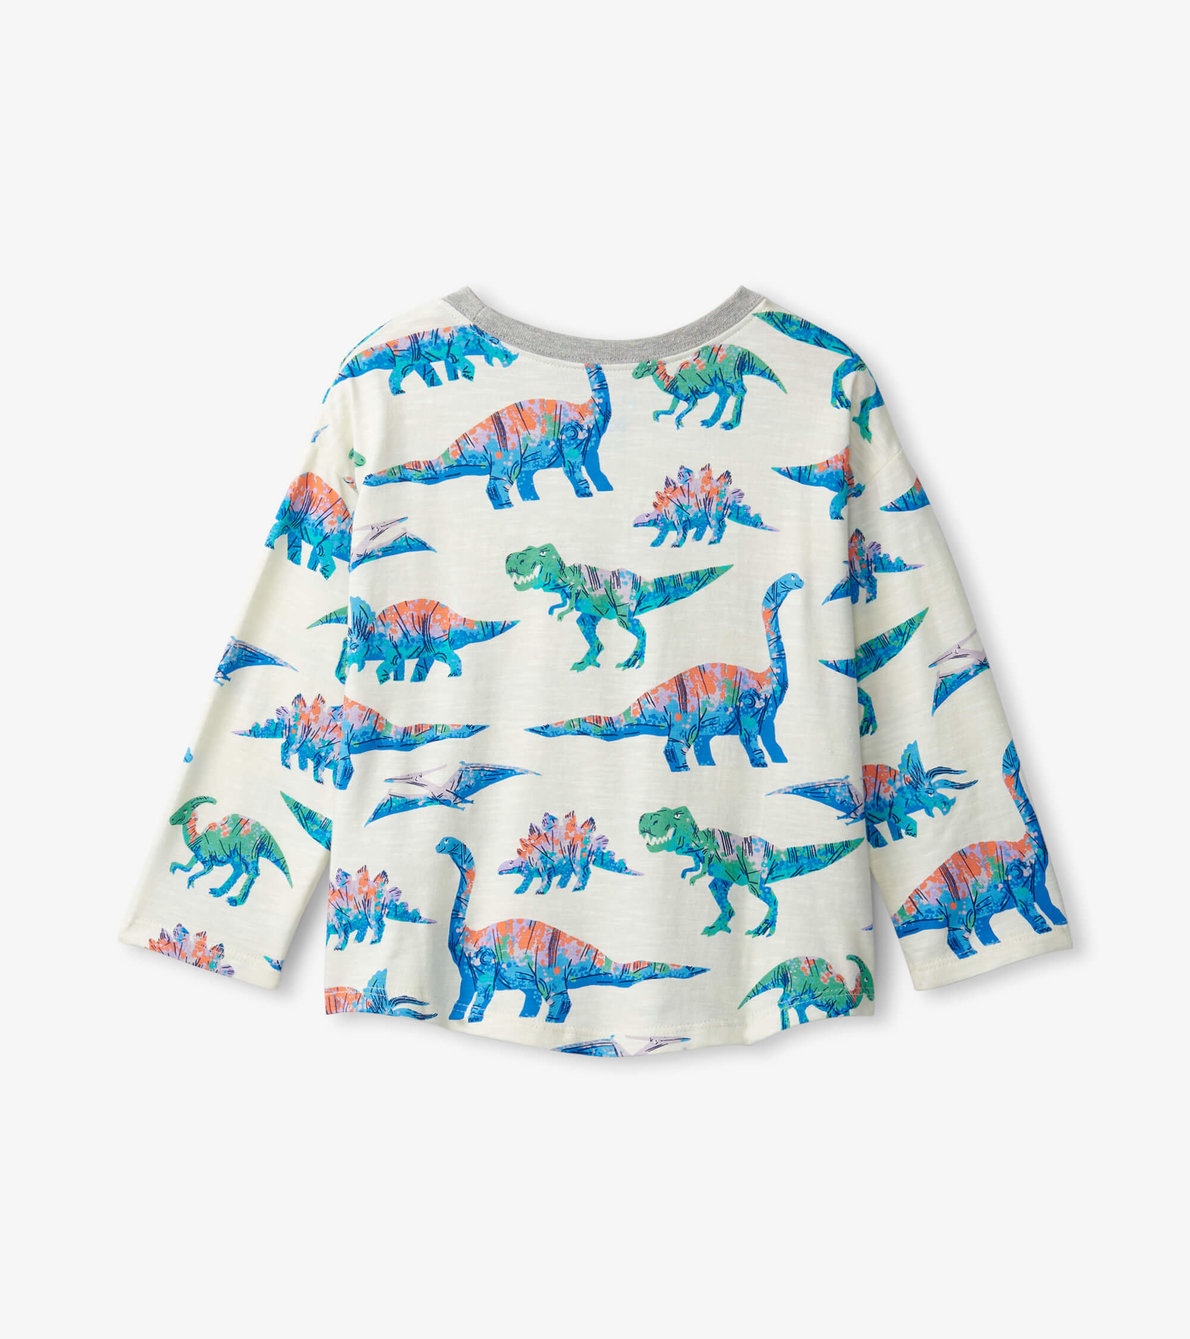 View larger image of Dinosaurs Long Sleeve T-Shirt